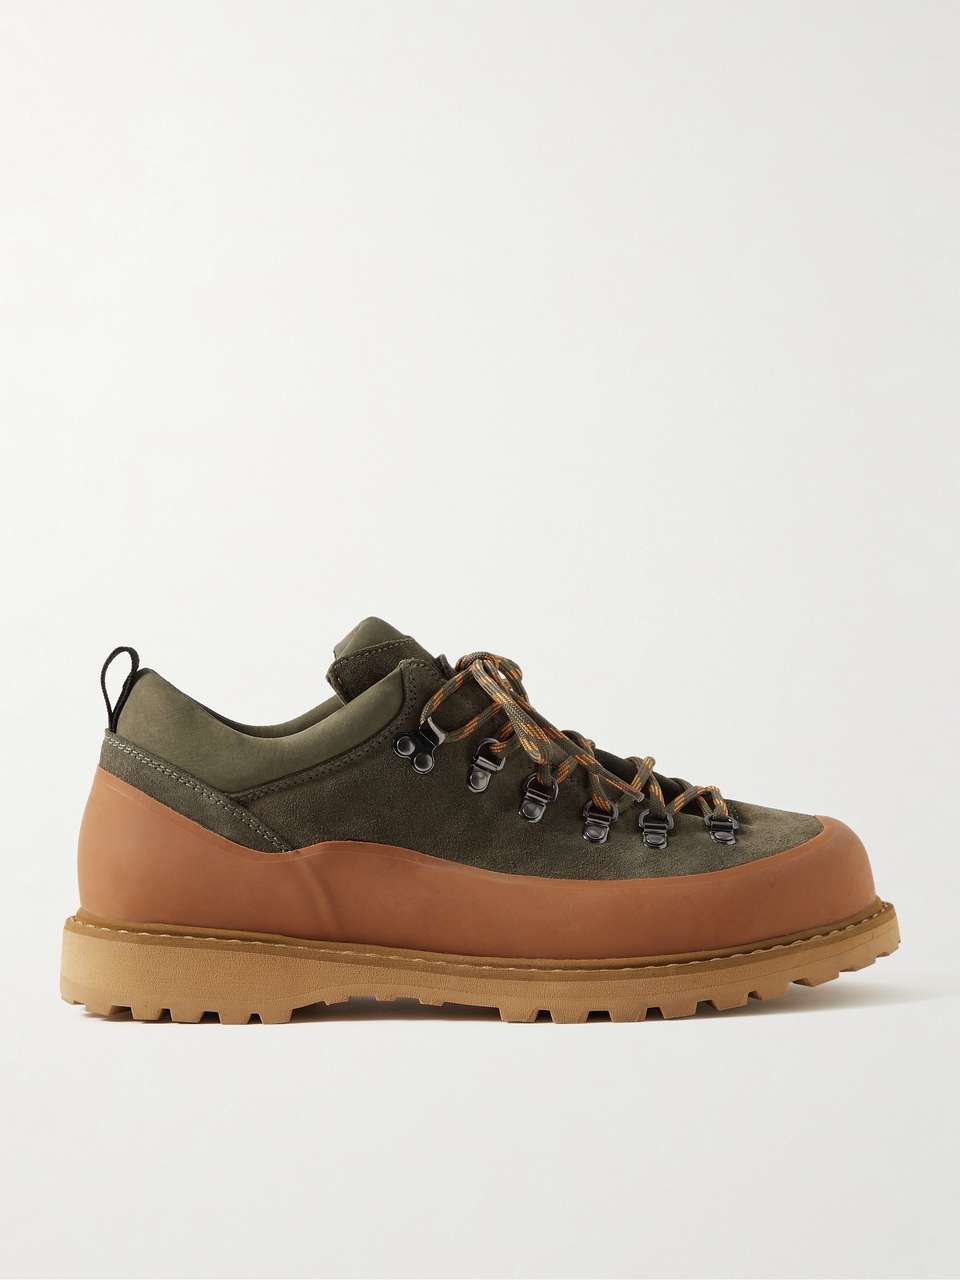 DIEMME + Throwing Fits Roccia Basso Rubber-Trimmed Suede Hiking Boots ...